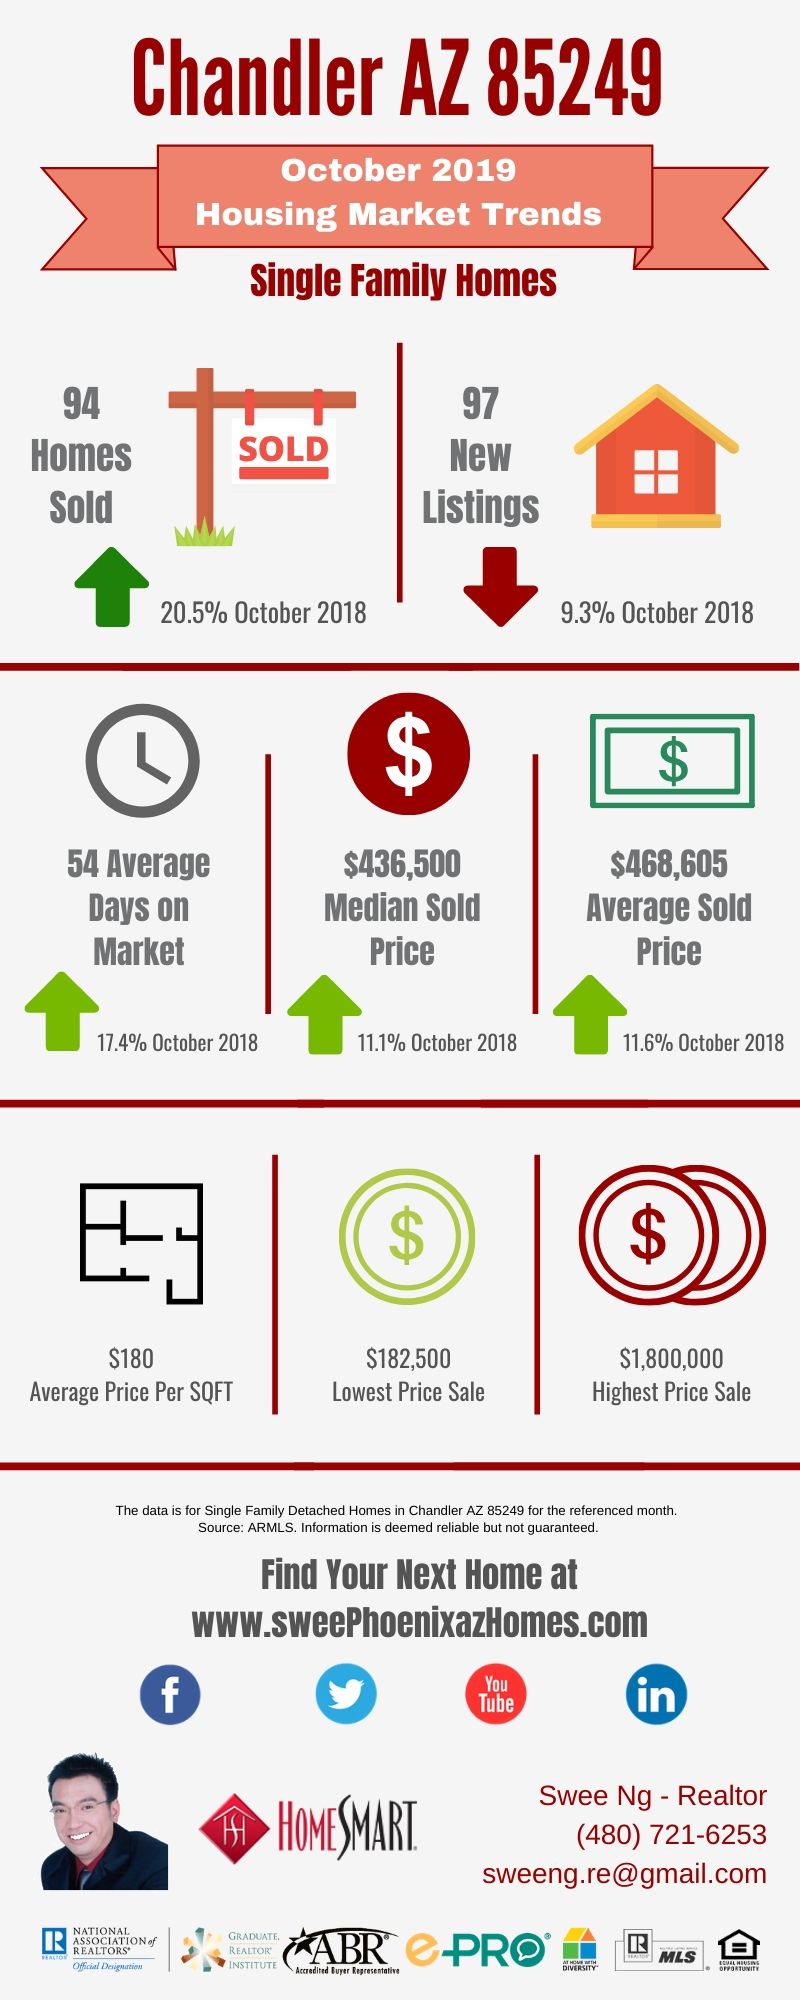 Chandler AZ 85249 Housing Market Trends Report October 2019, House Value, Real Estate and Statistic by Swee Ng